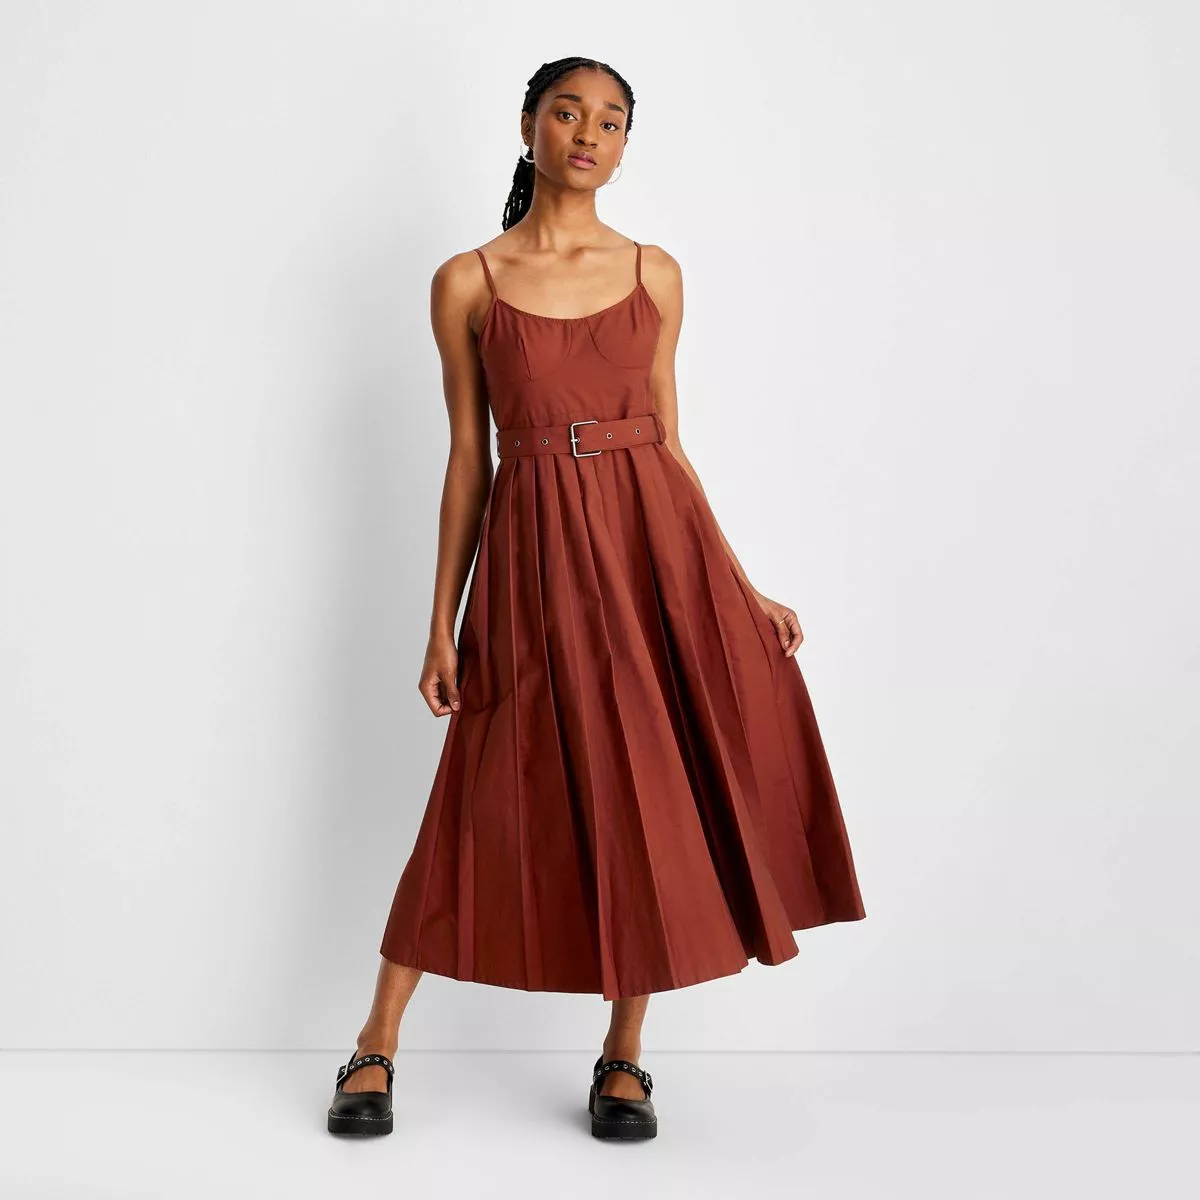 Women's Belt Buckle Pleated Midi Skirt - Future Collective™ with Reese  Blutstein Tan 00